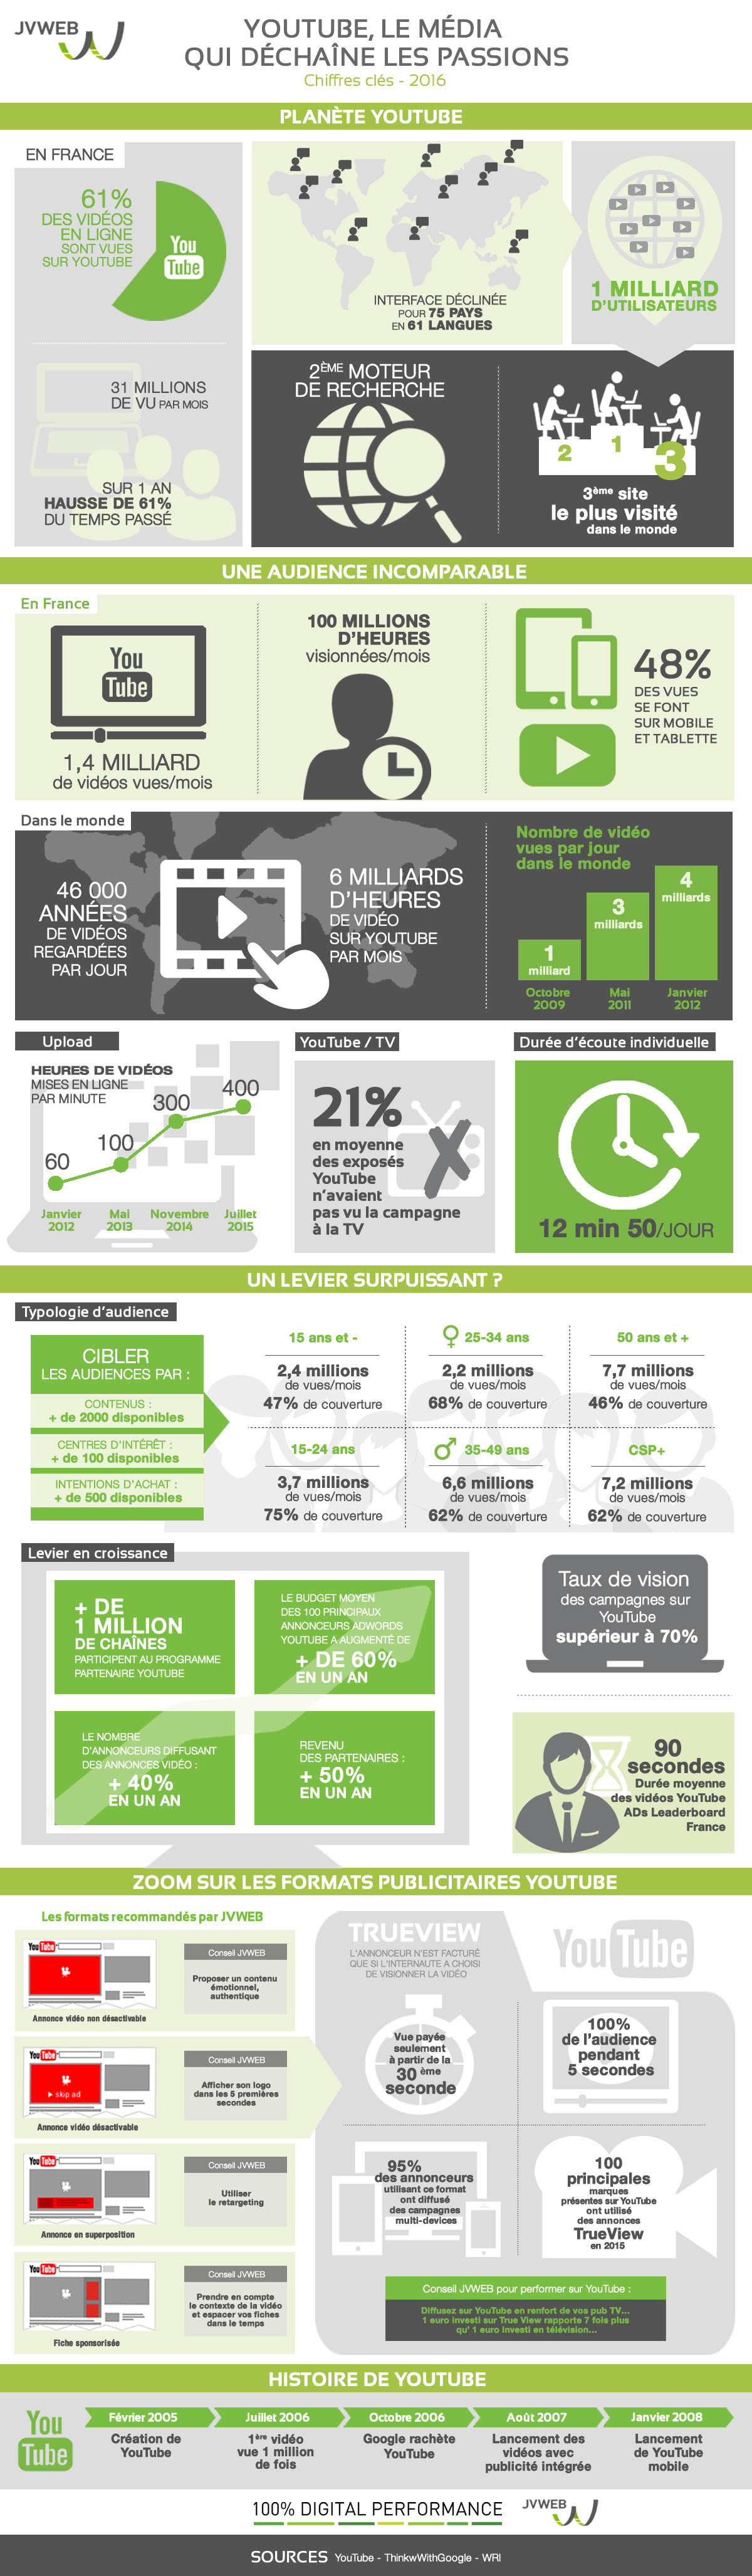 infographie-youtube-startup